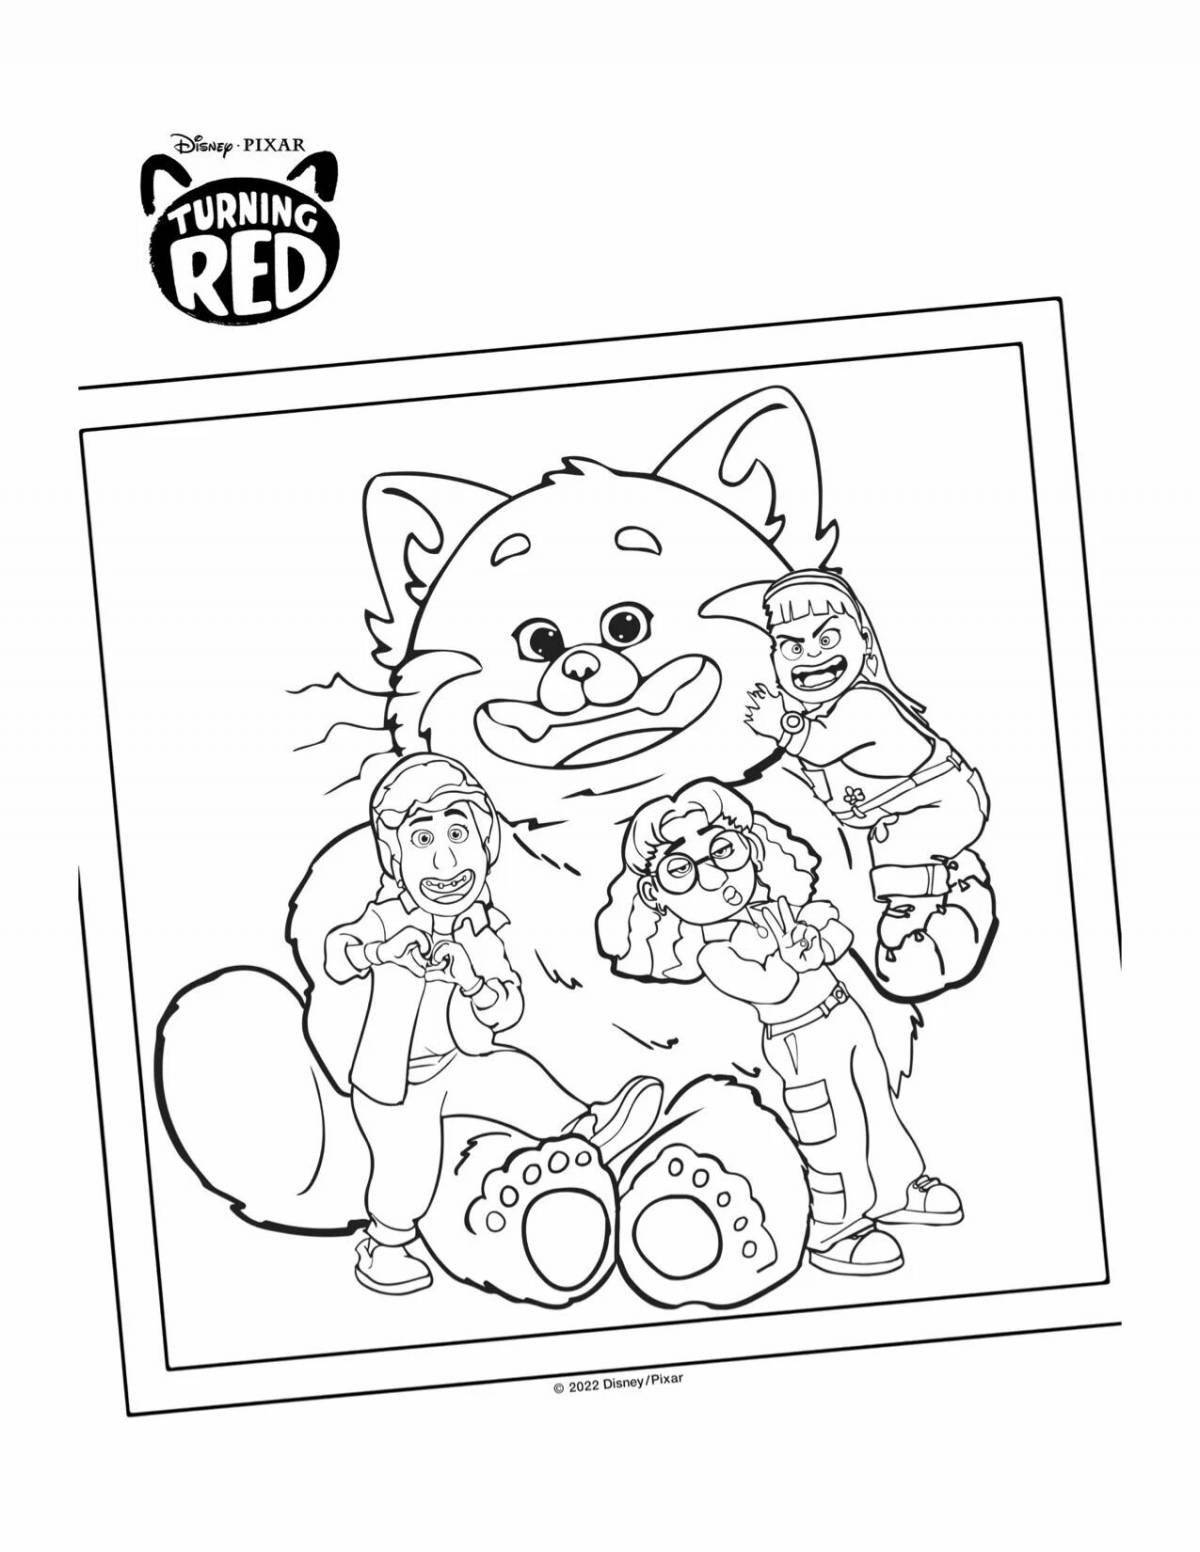 Coloring playful red friend